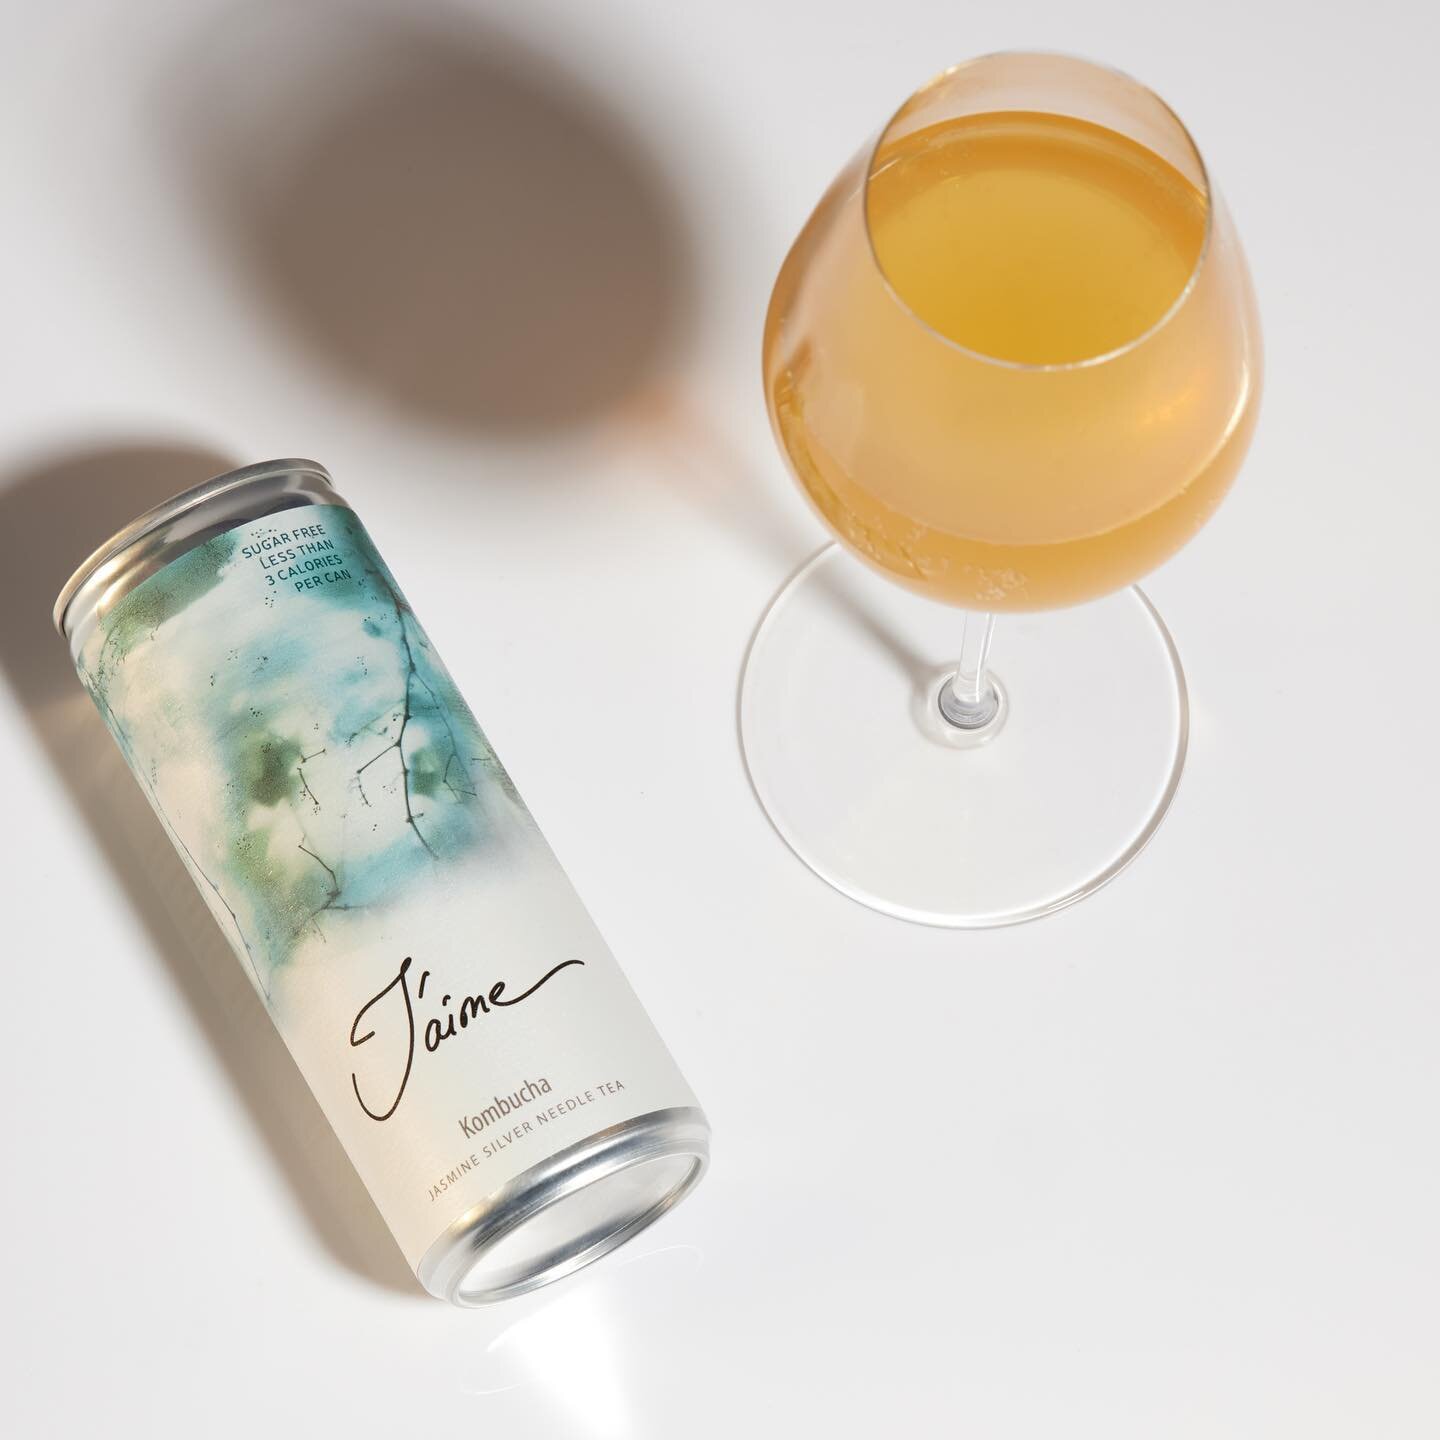 Made using a unique combination of four of the world&rsquo;s most exceptional white and green teas (Snow Bud, Jasmine Huang Shan Ya, Sencha and Jasmine Ying Zhen Silver Needle), J&rsquo;aime Original Kombucha is made in small batch production in the 